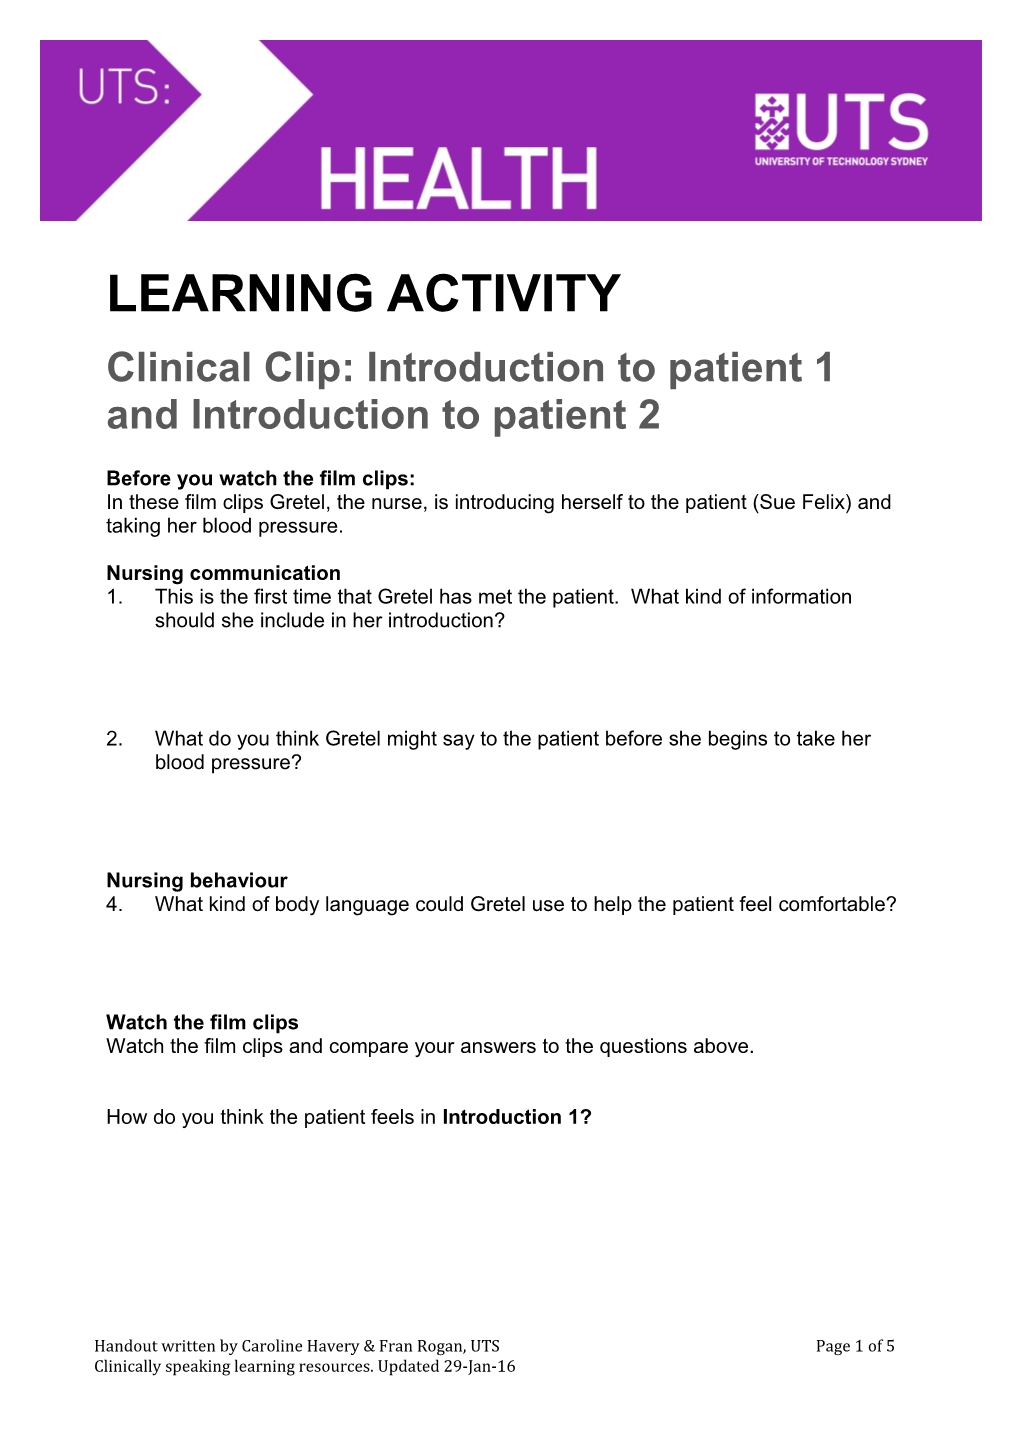 Clinical Clip: Introduction to Patient 1 and Introduction to Patient 2